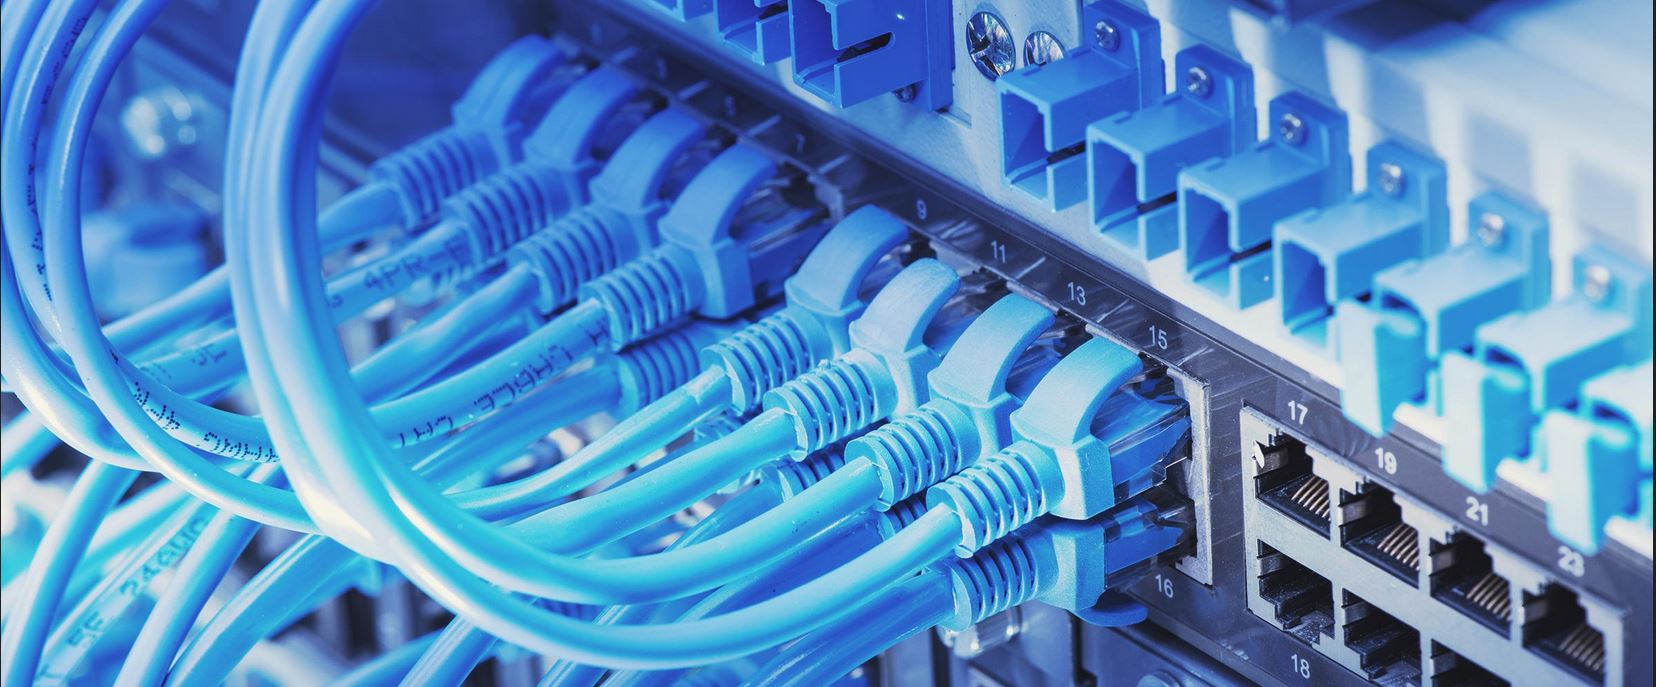 What Is a Patch Panel? Benefits & Uses for Networks - C&C Technology Group